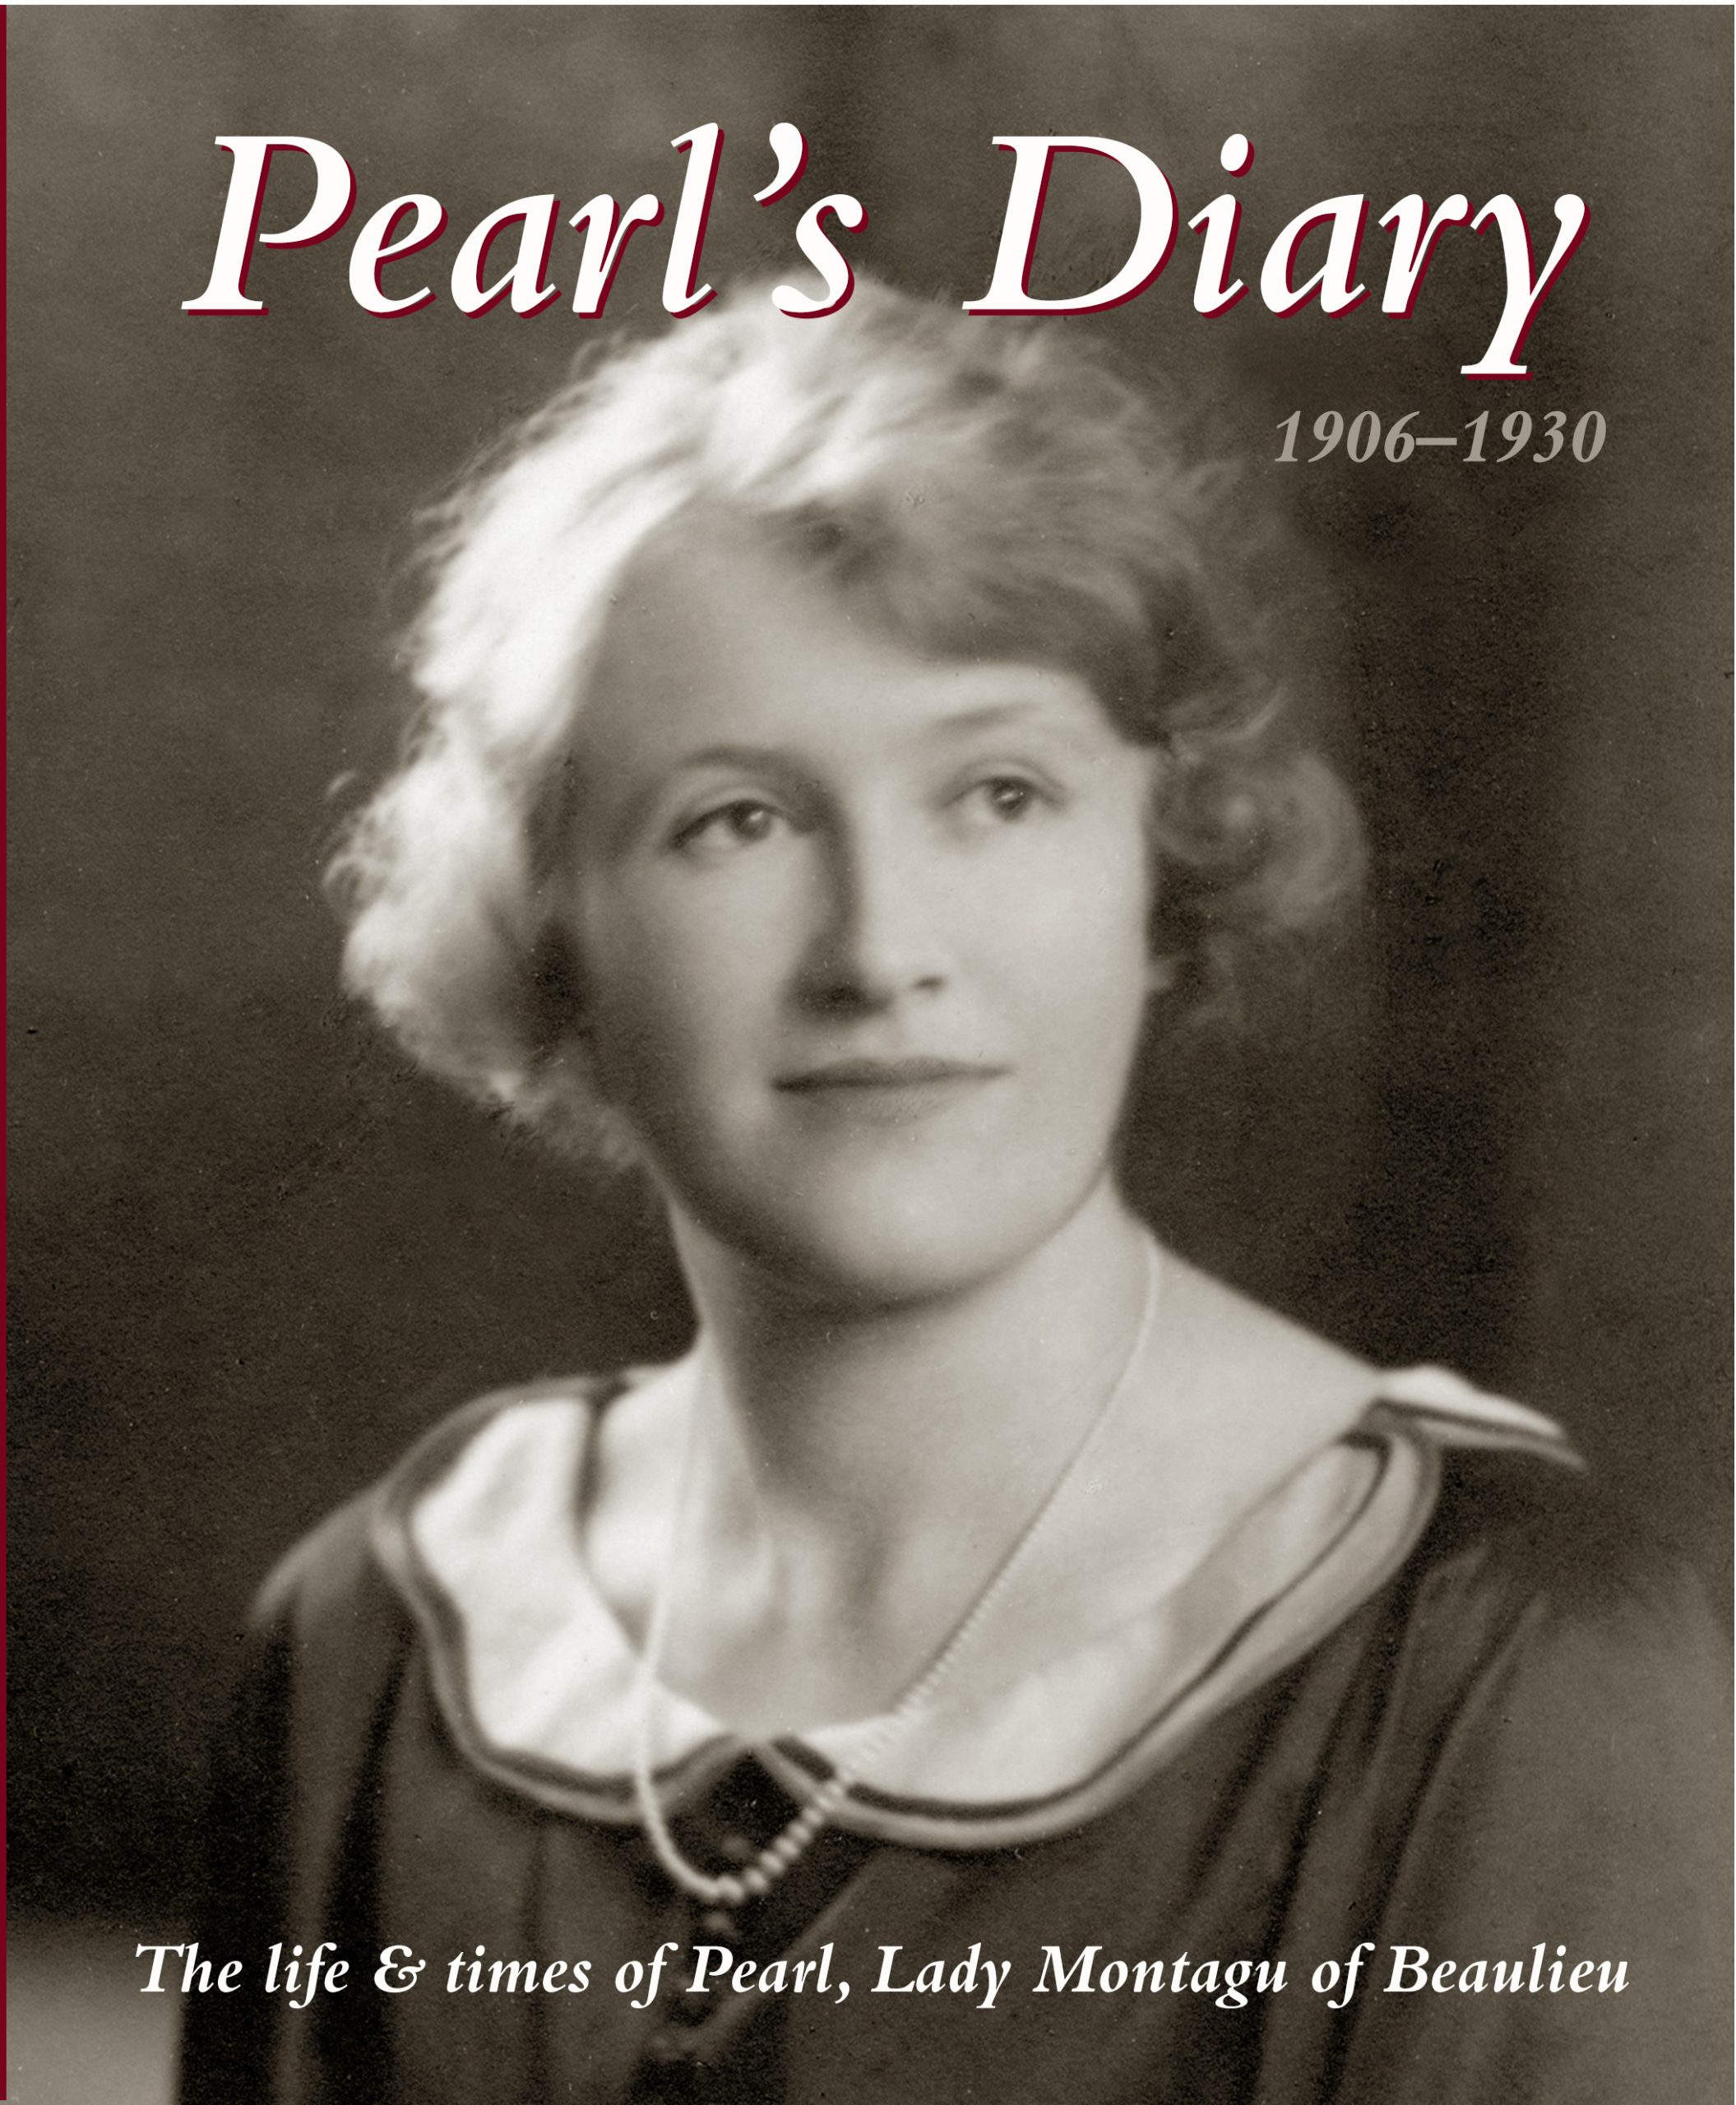 Pearl's diary book cover